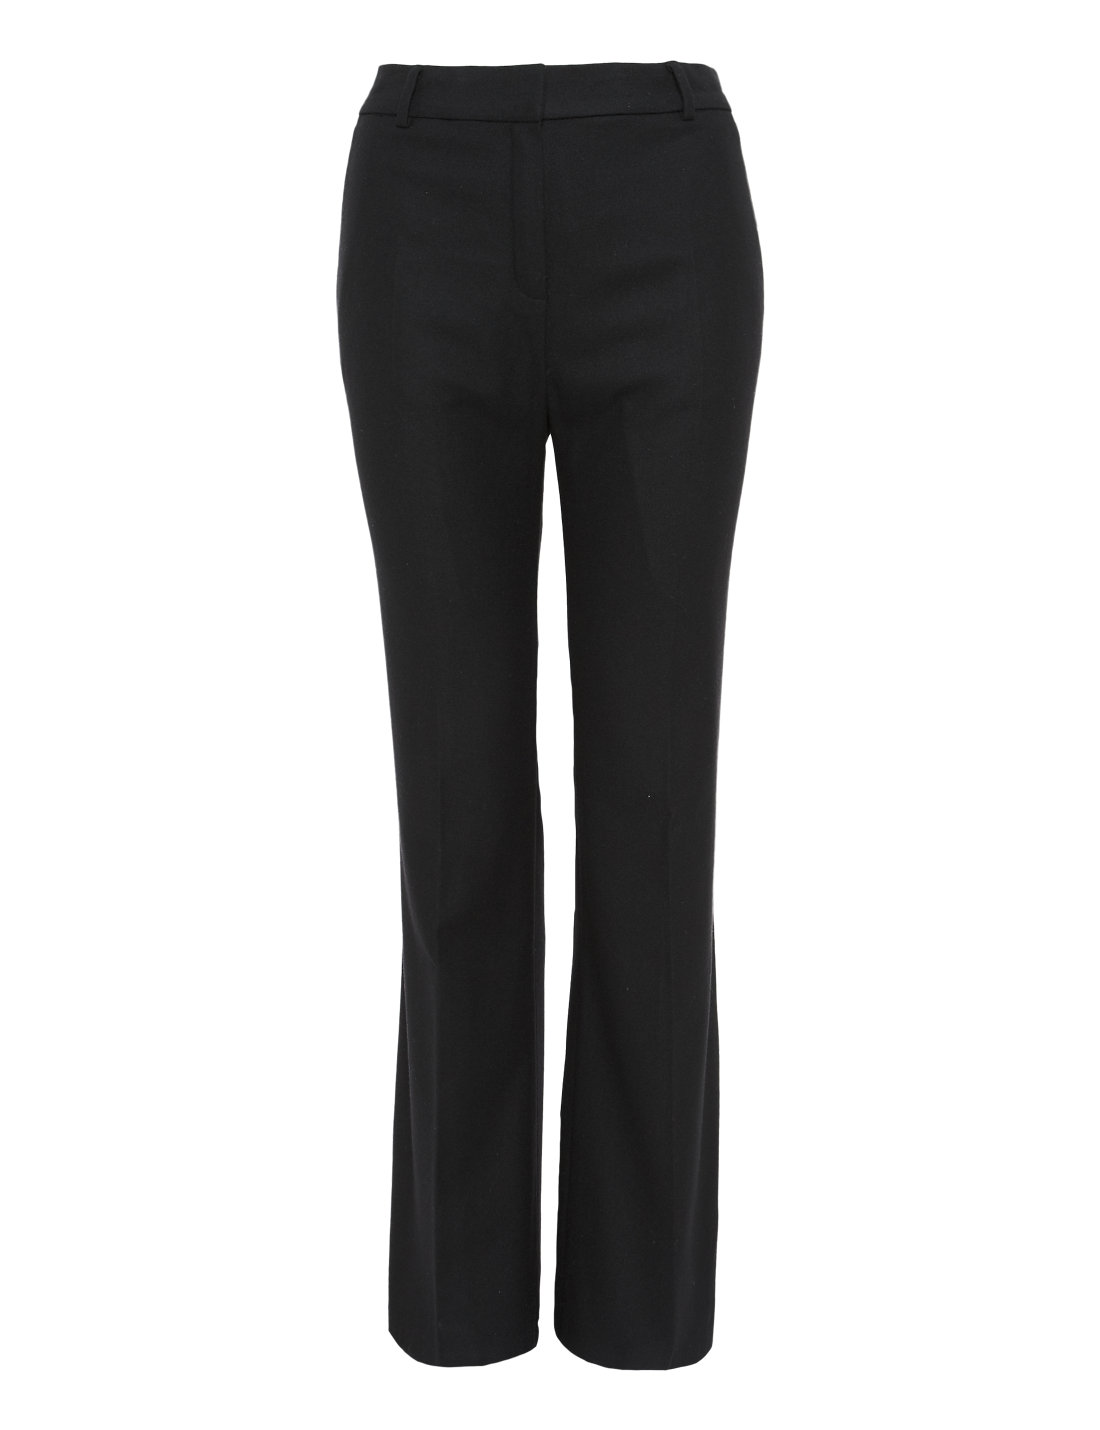 Marks and Spencer - - M&5 BLACK Luxury New Wool Cashmere Blend Slim ...